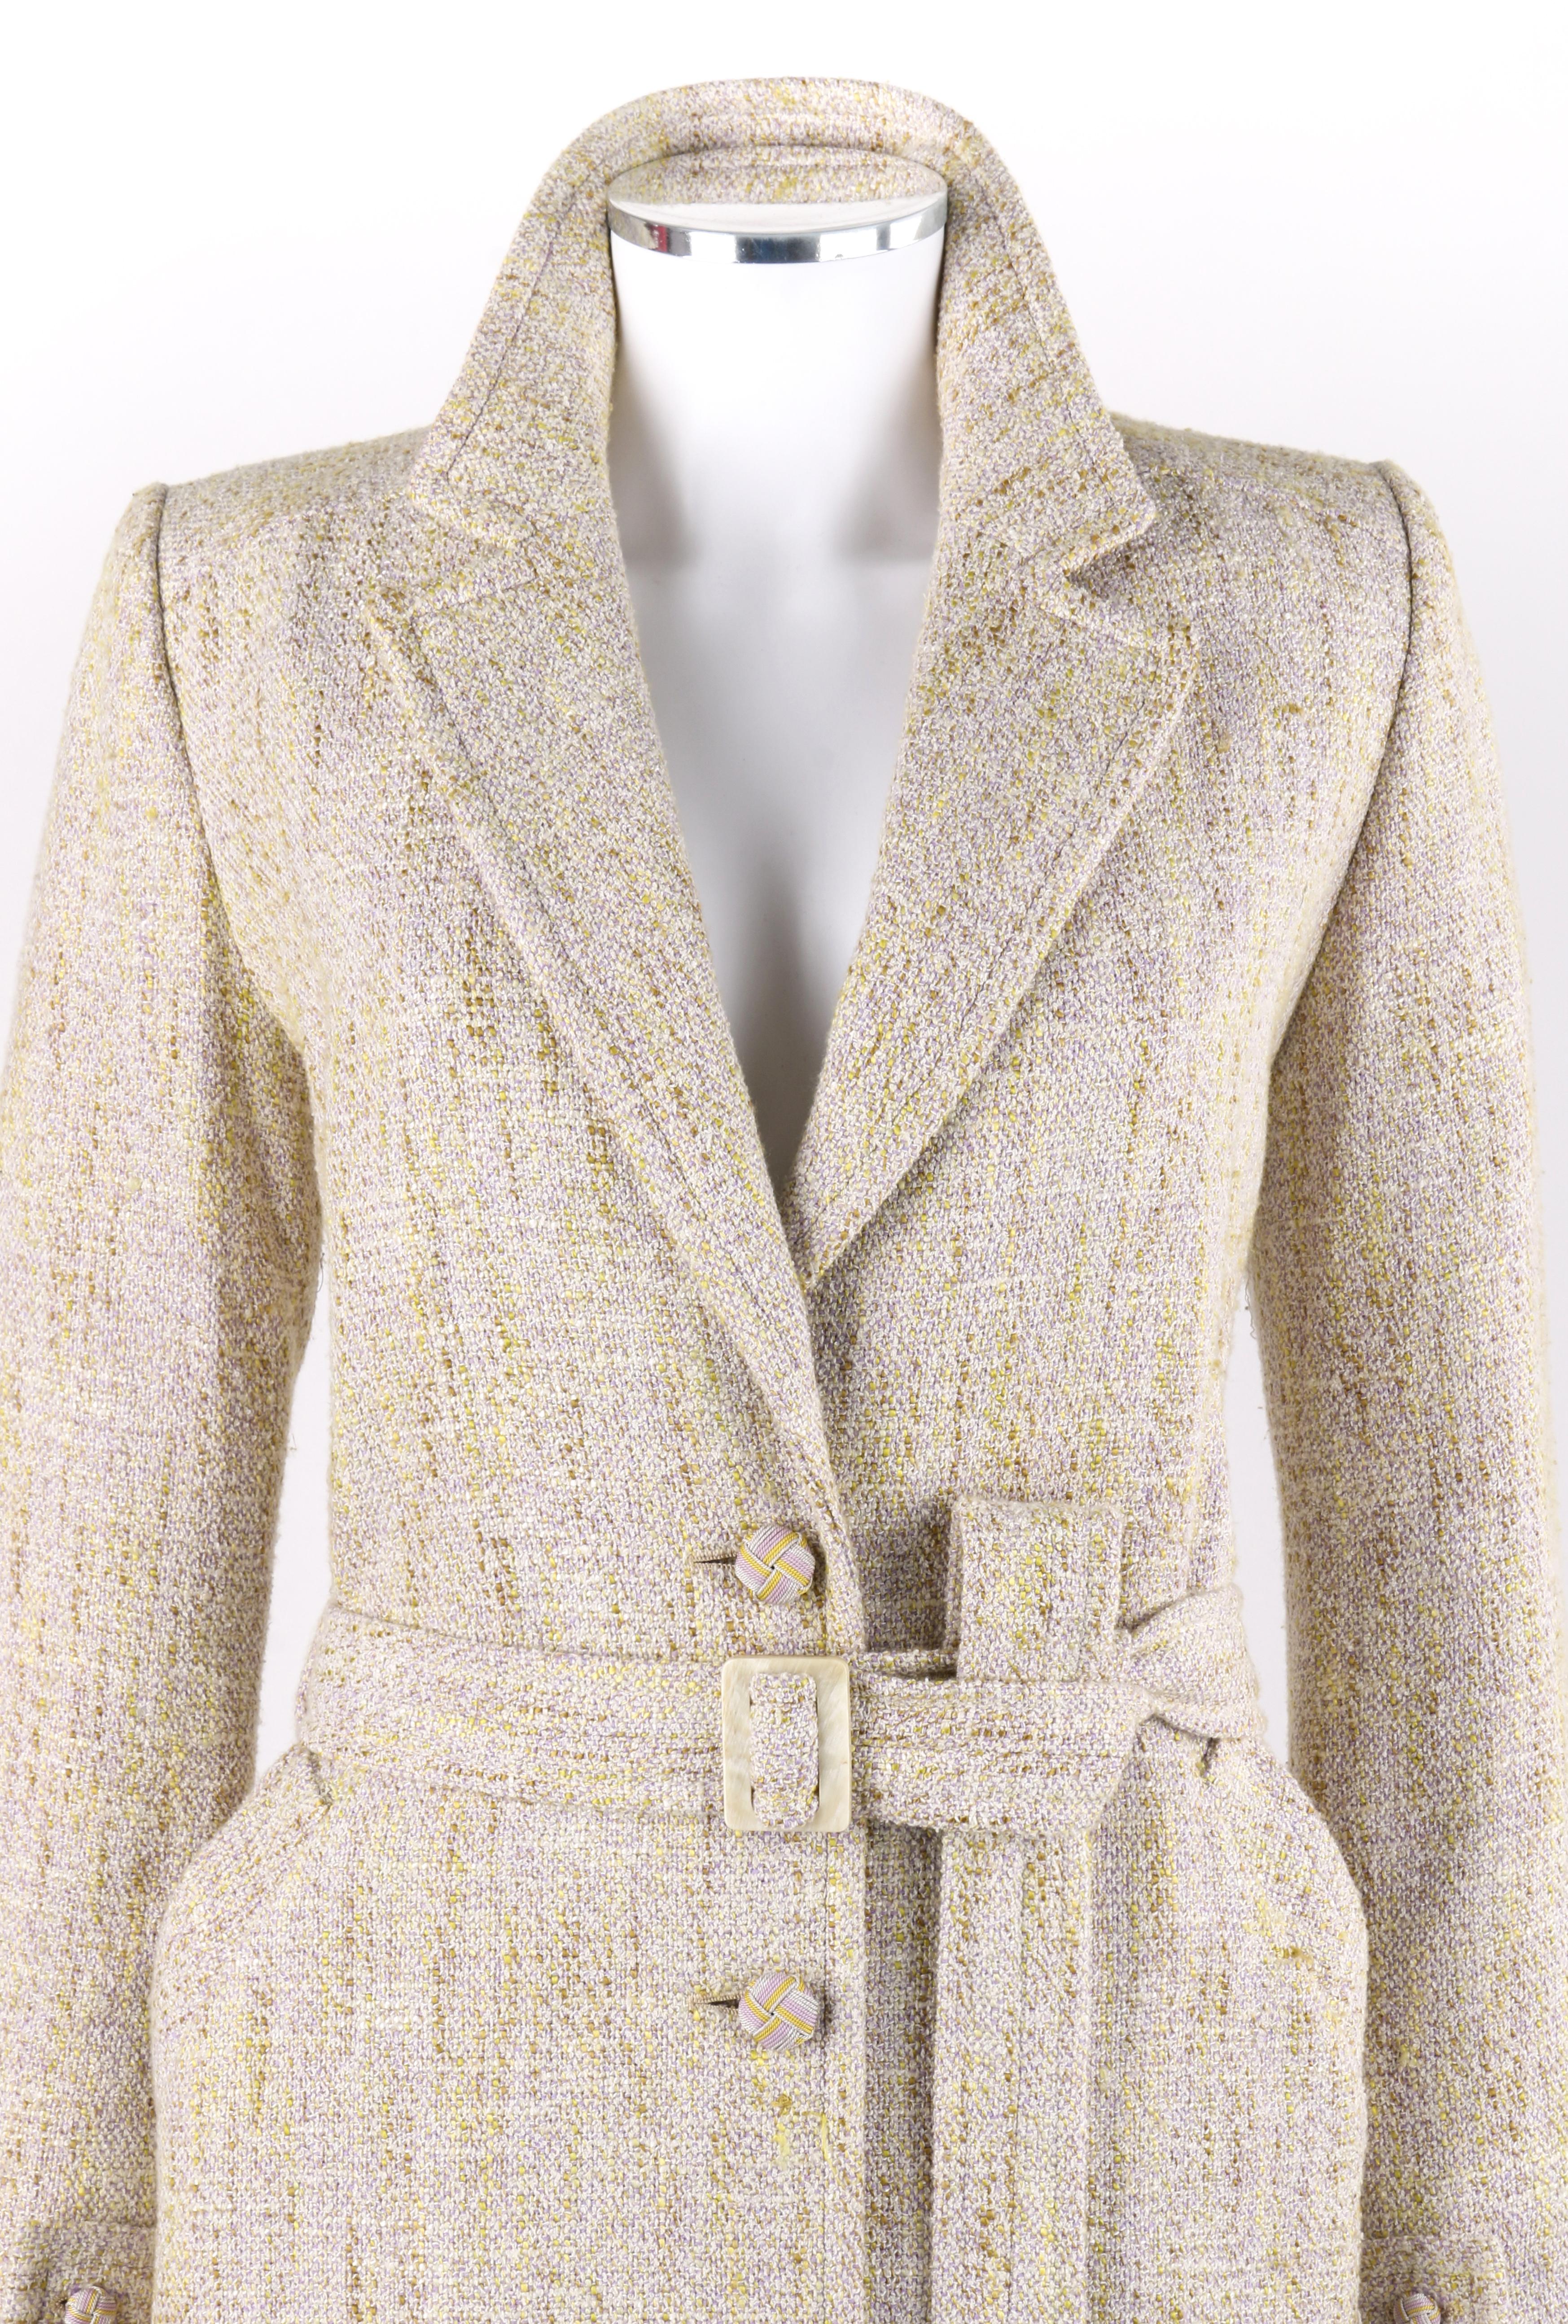 BILL BLASS c.1990’s Purple Yellow Wool Tweed Long Belted Overcoat
 
Circa: 1990’s
Label(s): Bill Blass / Made In U.S.A. / Neiman Marcus
Style: Overcoat
Color(s): Shades of beige, green, yellow and purple.
Lined: Yes
Unmarked Fabric Content (feel